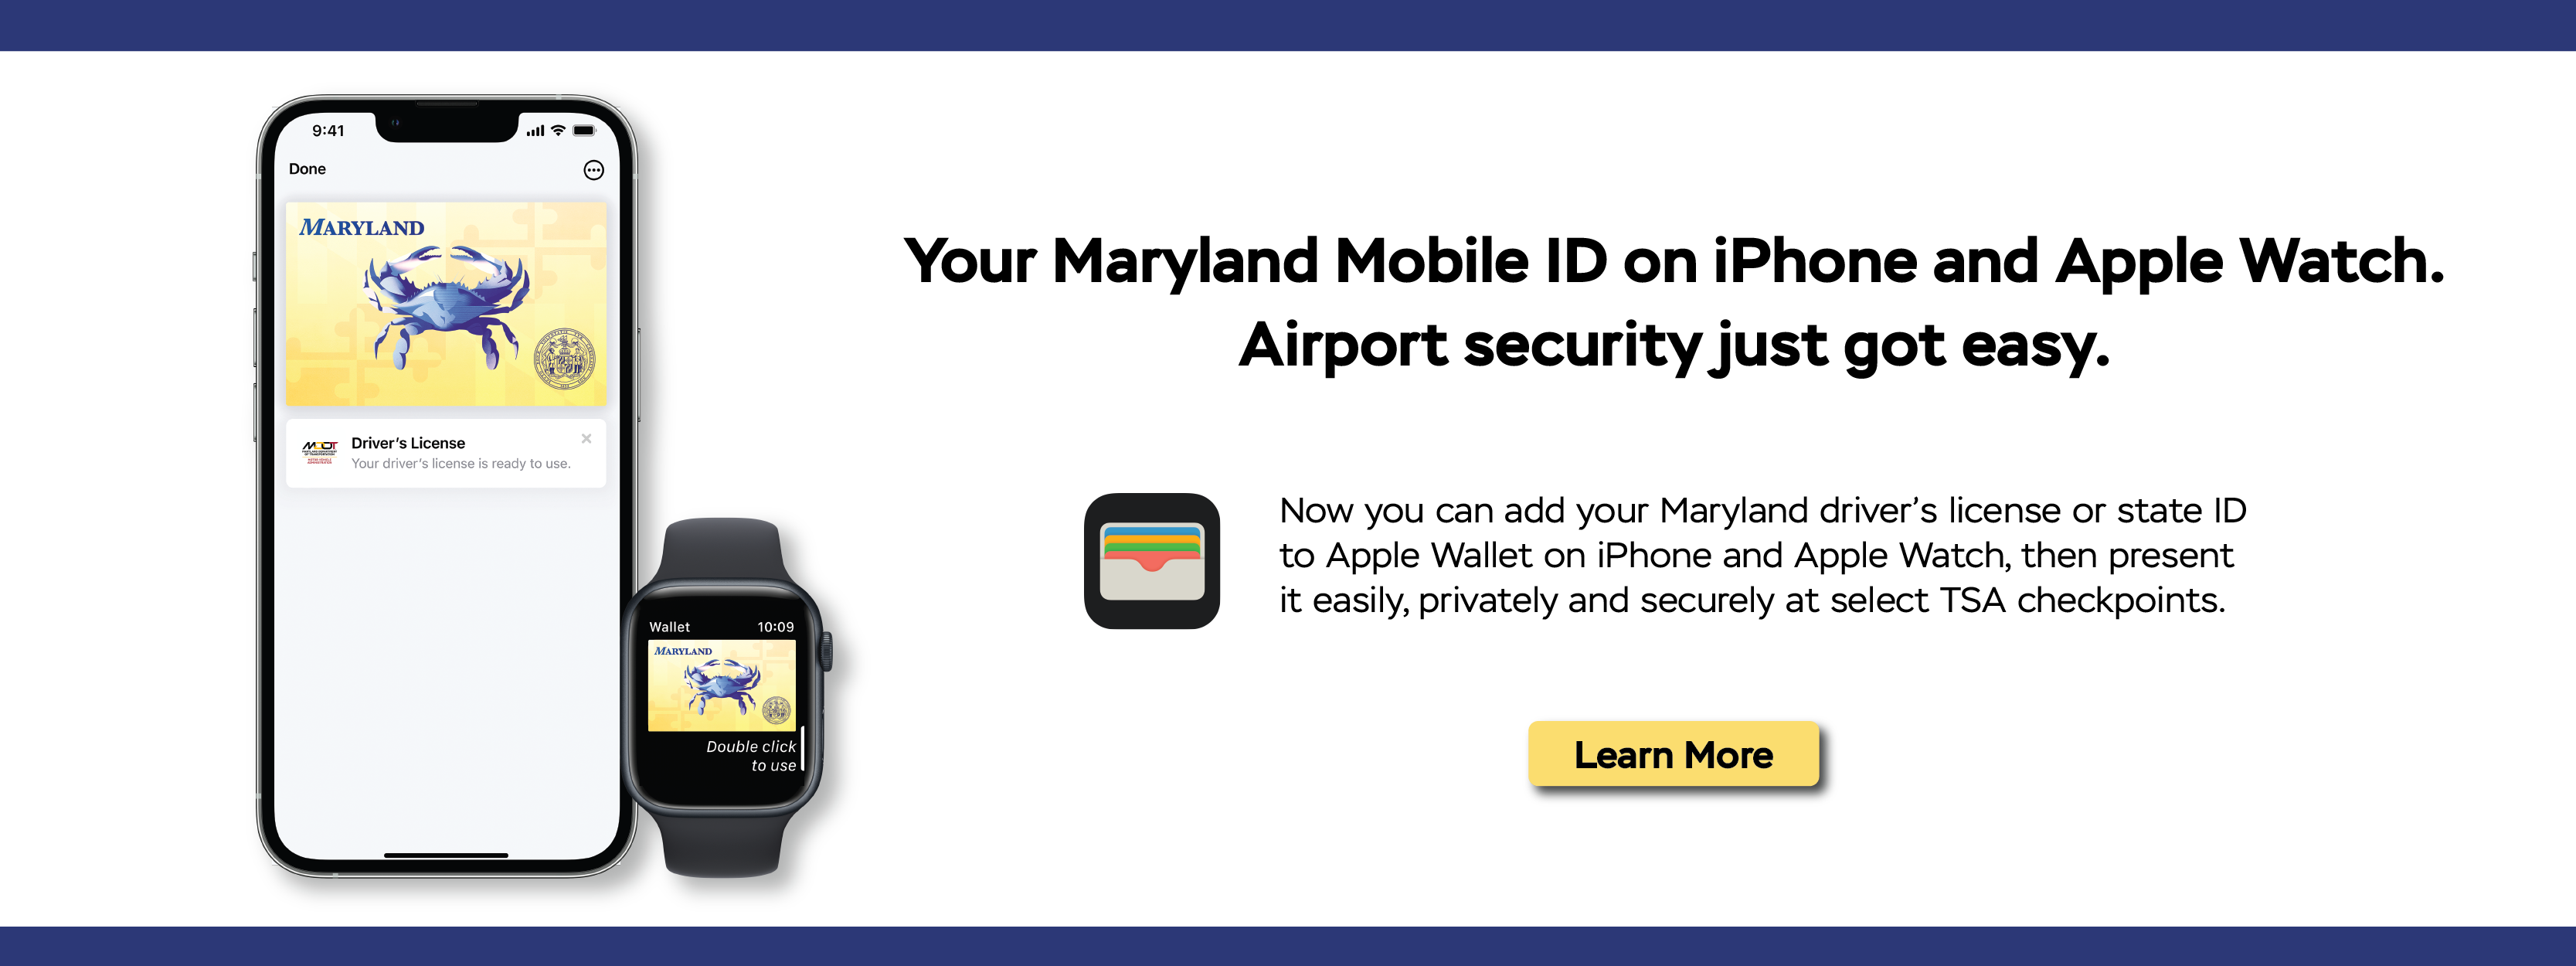 Your Maryland Mobile ID on iPhone and Apple Watch